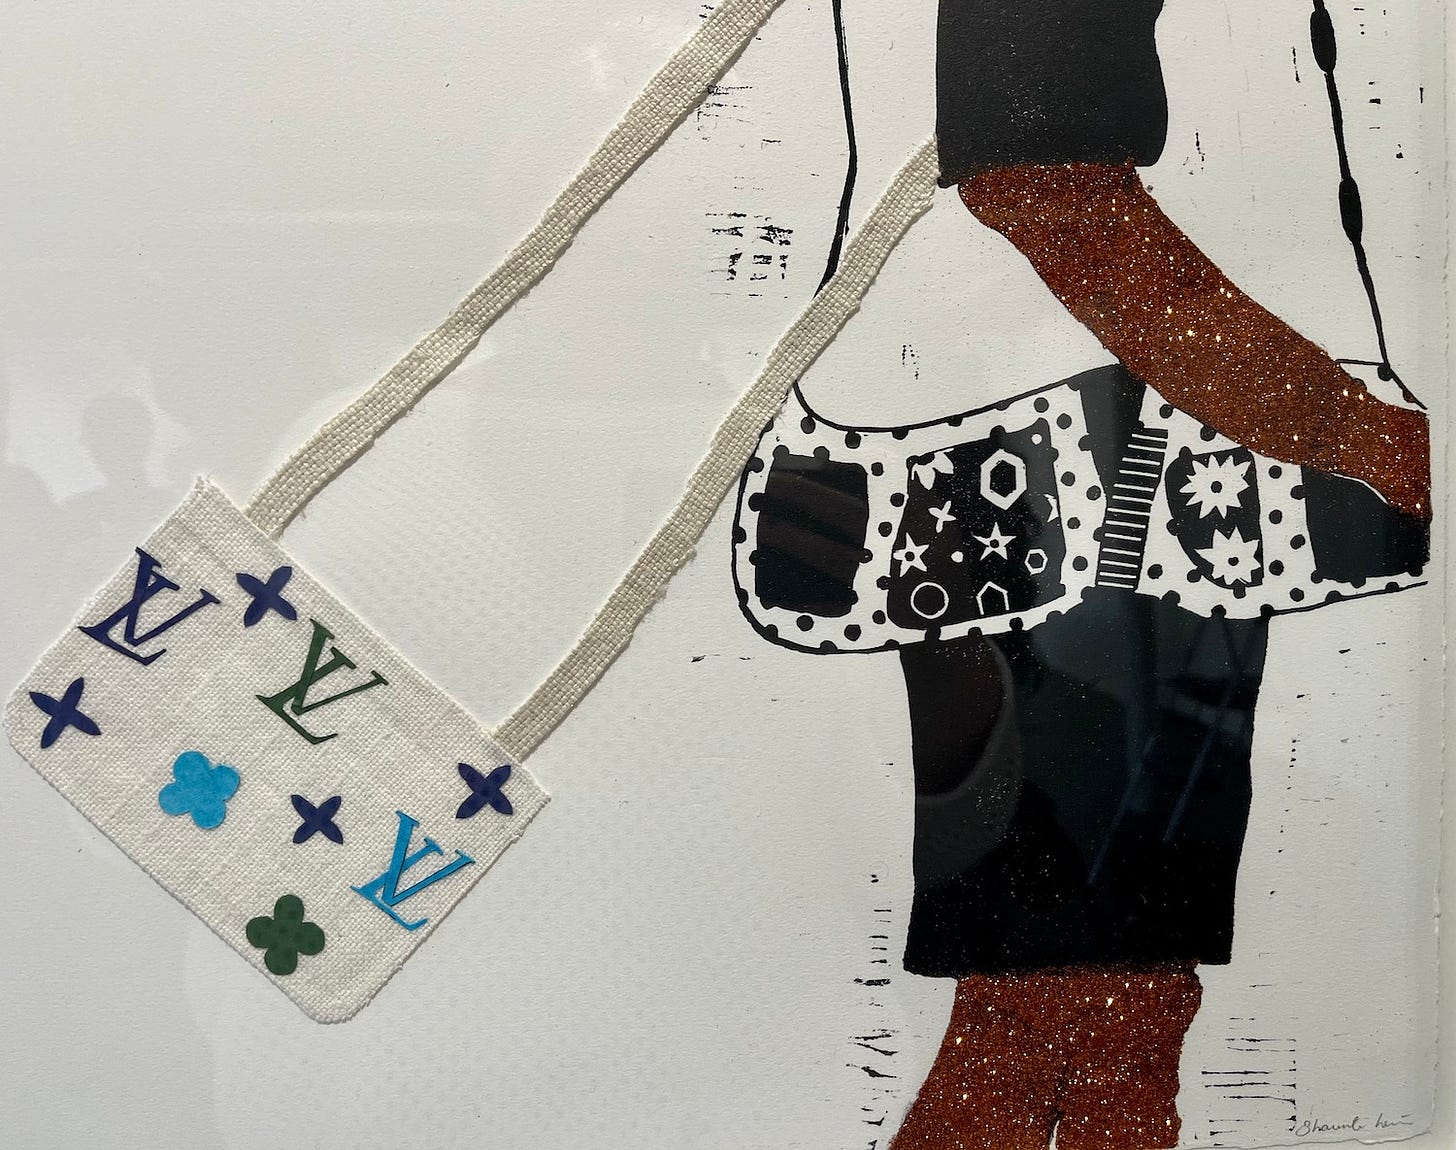 A detail of one of the works in Shaunte' Levine's exhibition "Go'n Grab Your Little Purse." The black-and-white print of a young black girl is layered with glitter (on her arms and legs) and using textiles and vinyl stickers, Levine created a "Louis Vitton" purse for her to carry over her shoulder.